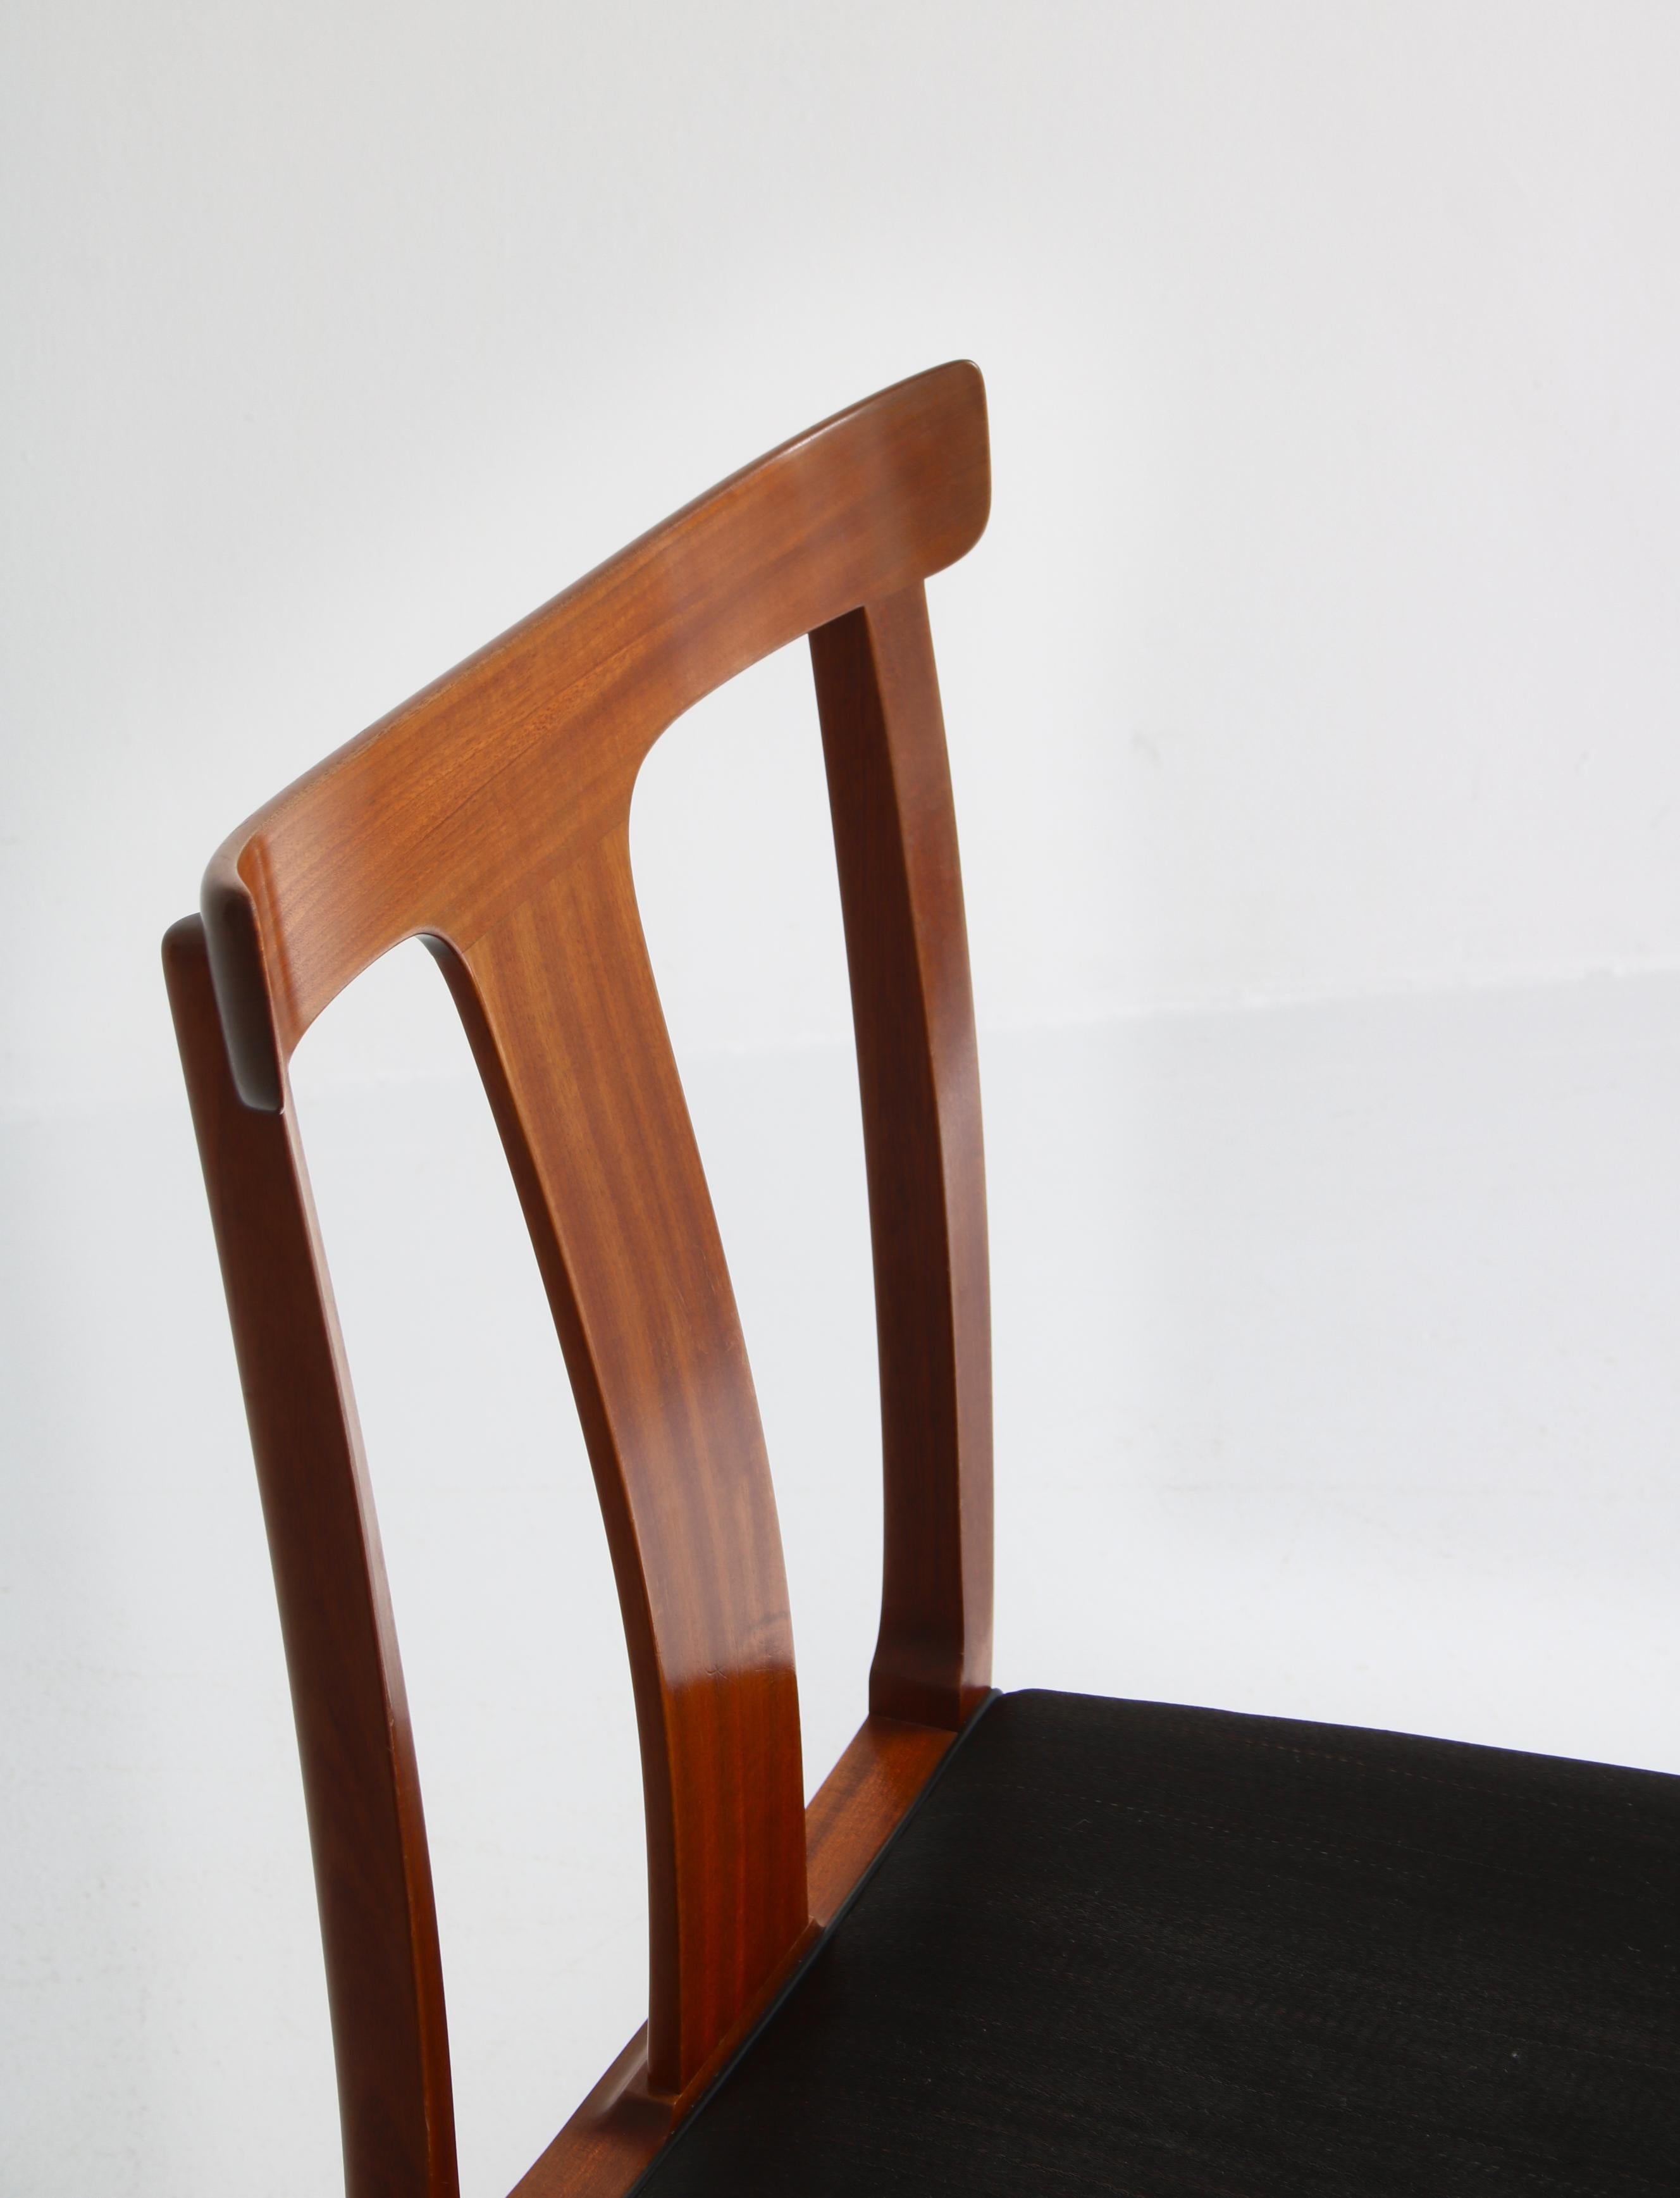 Ole Wanscher Dining Chairs in Mahogany and Horsehair Made by A.J. Iversen, 1960s For Sale 4